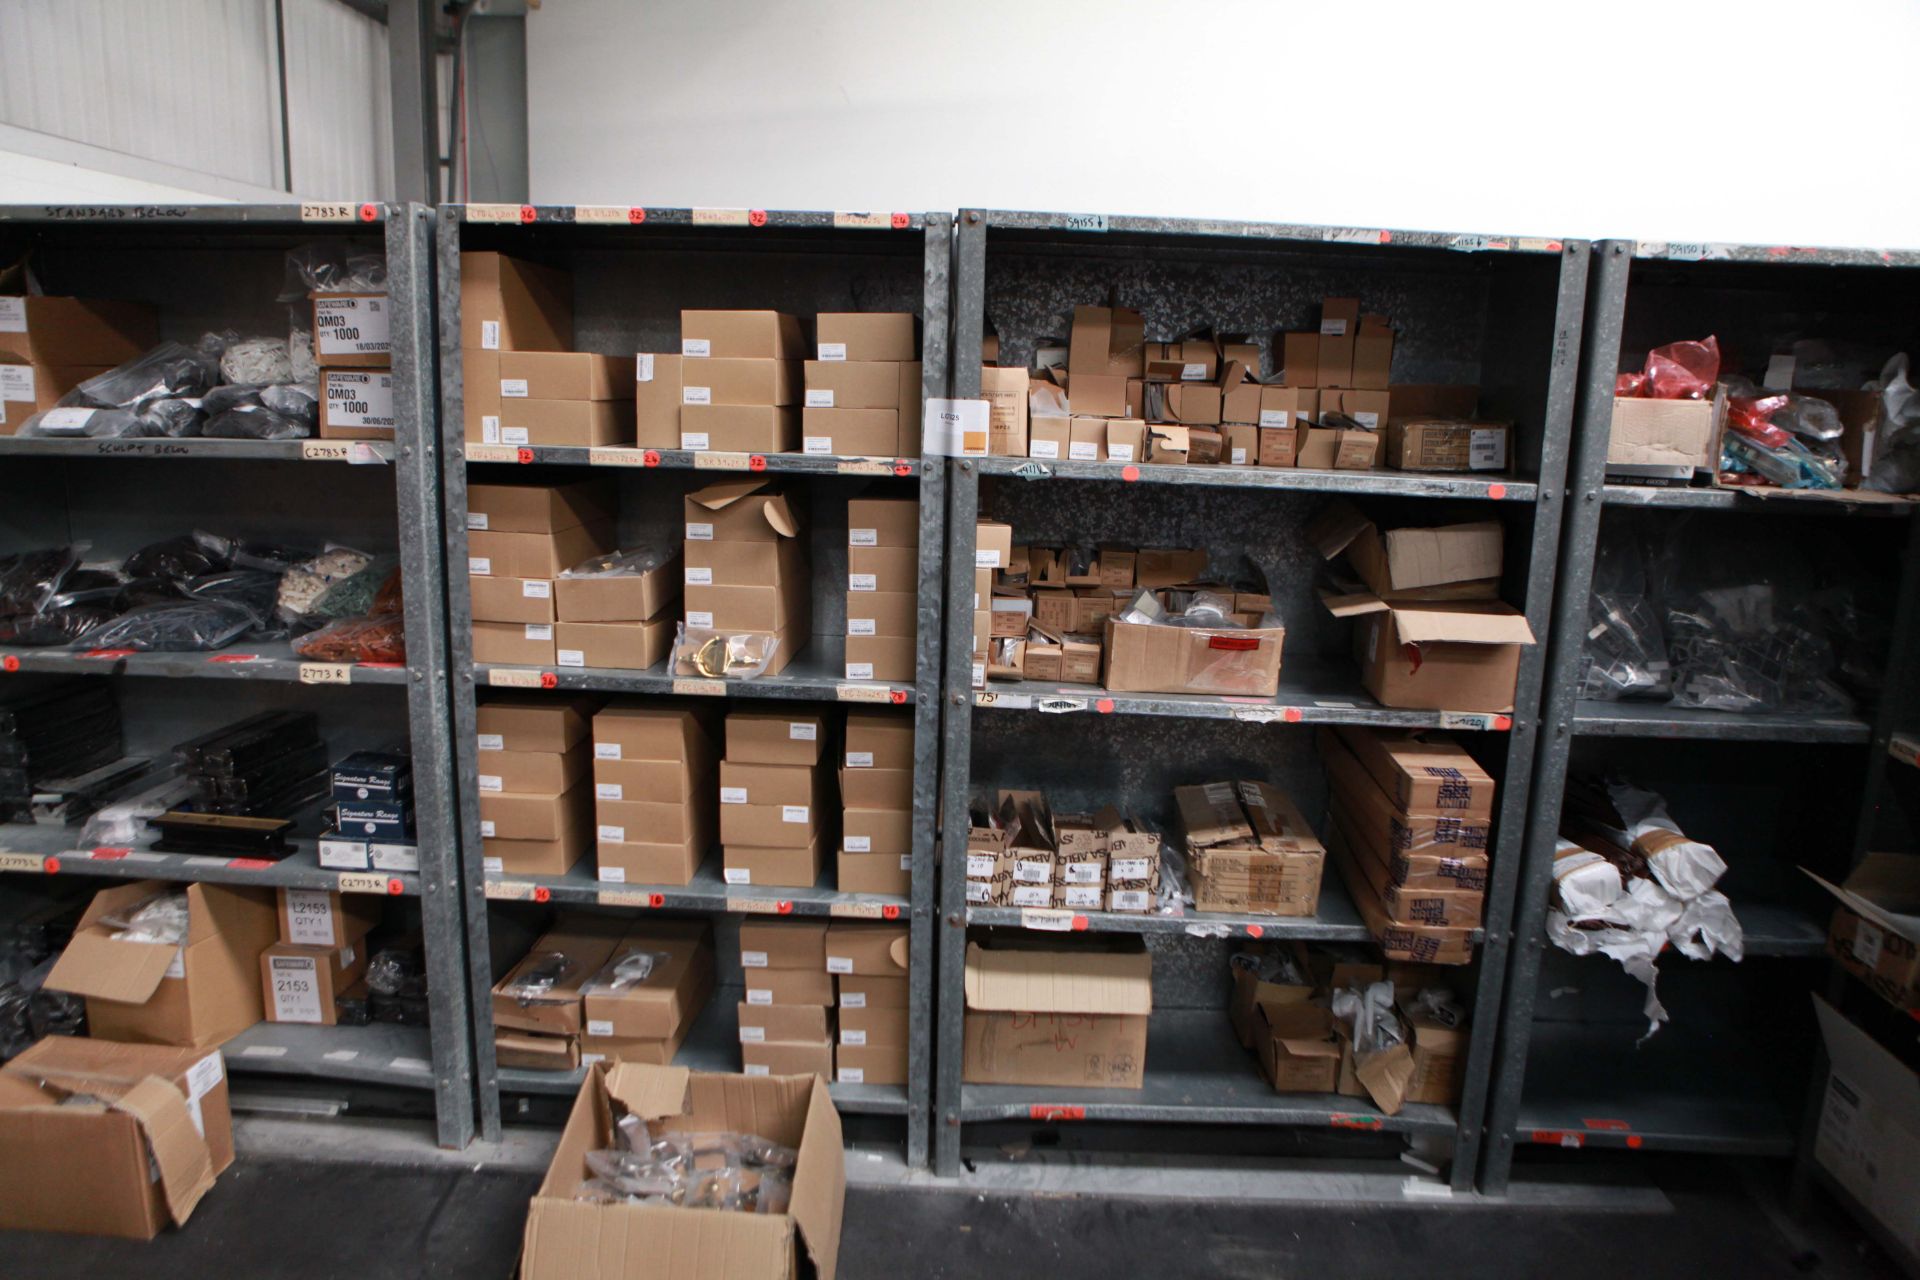 3 Bays of stores shelving